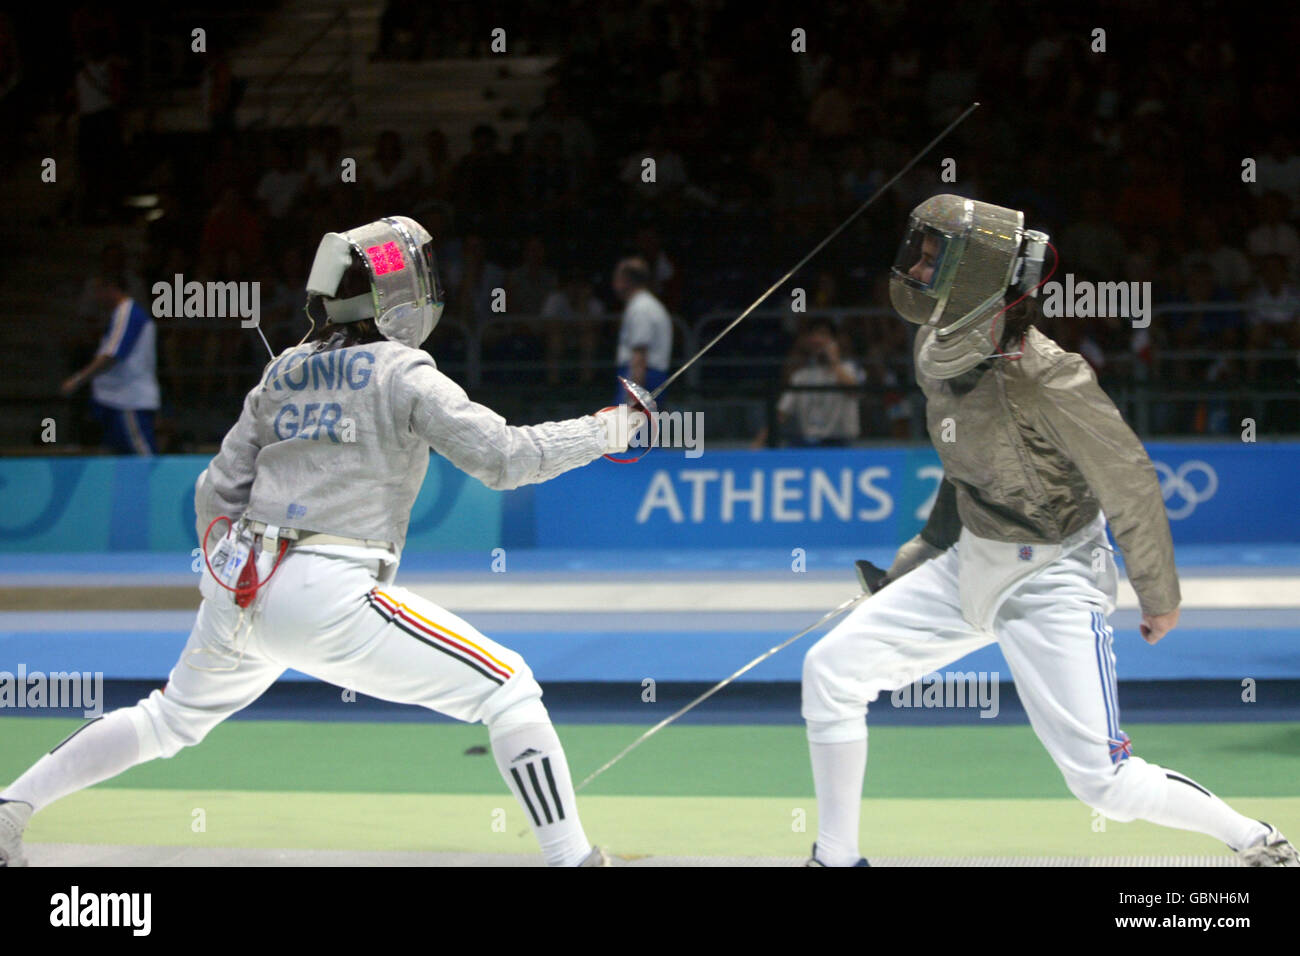 Great Britain's Louise Bond-Williams (r) on her way to beating Germany's Susanne Koenig (l) Stock Photo